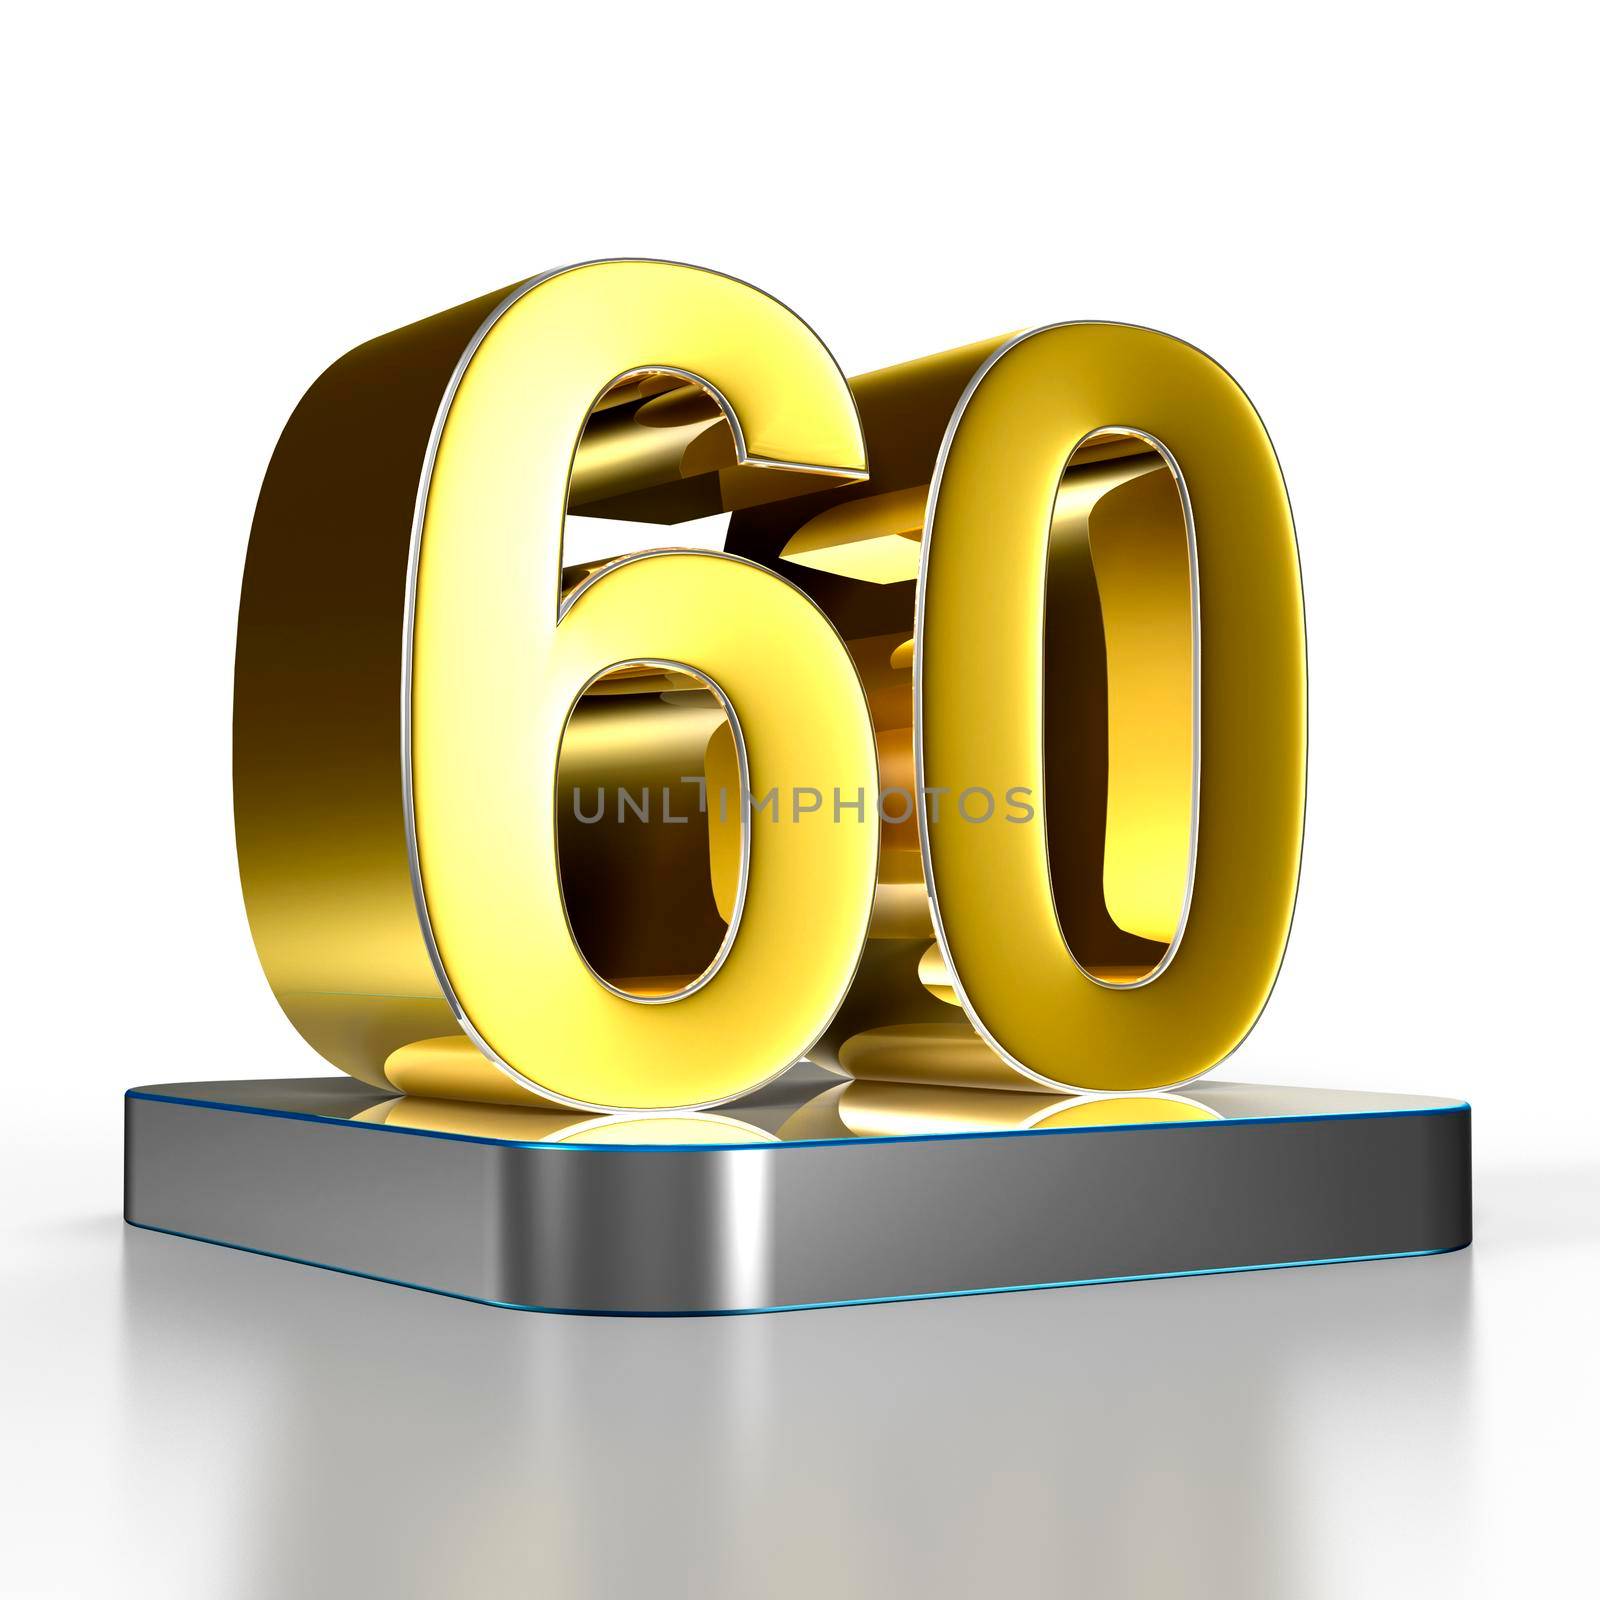 Numbers 60 gold are on a stainless steel platform illustration 3D rendering with clipping path.